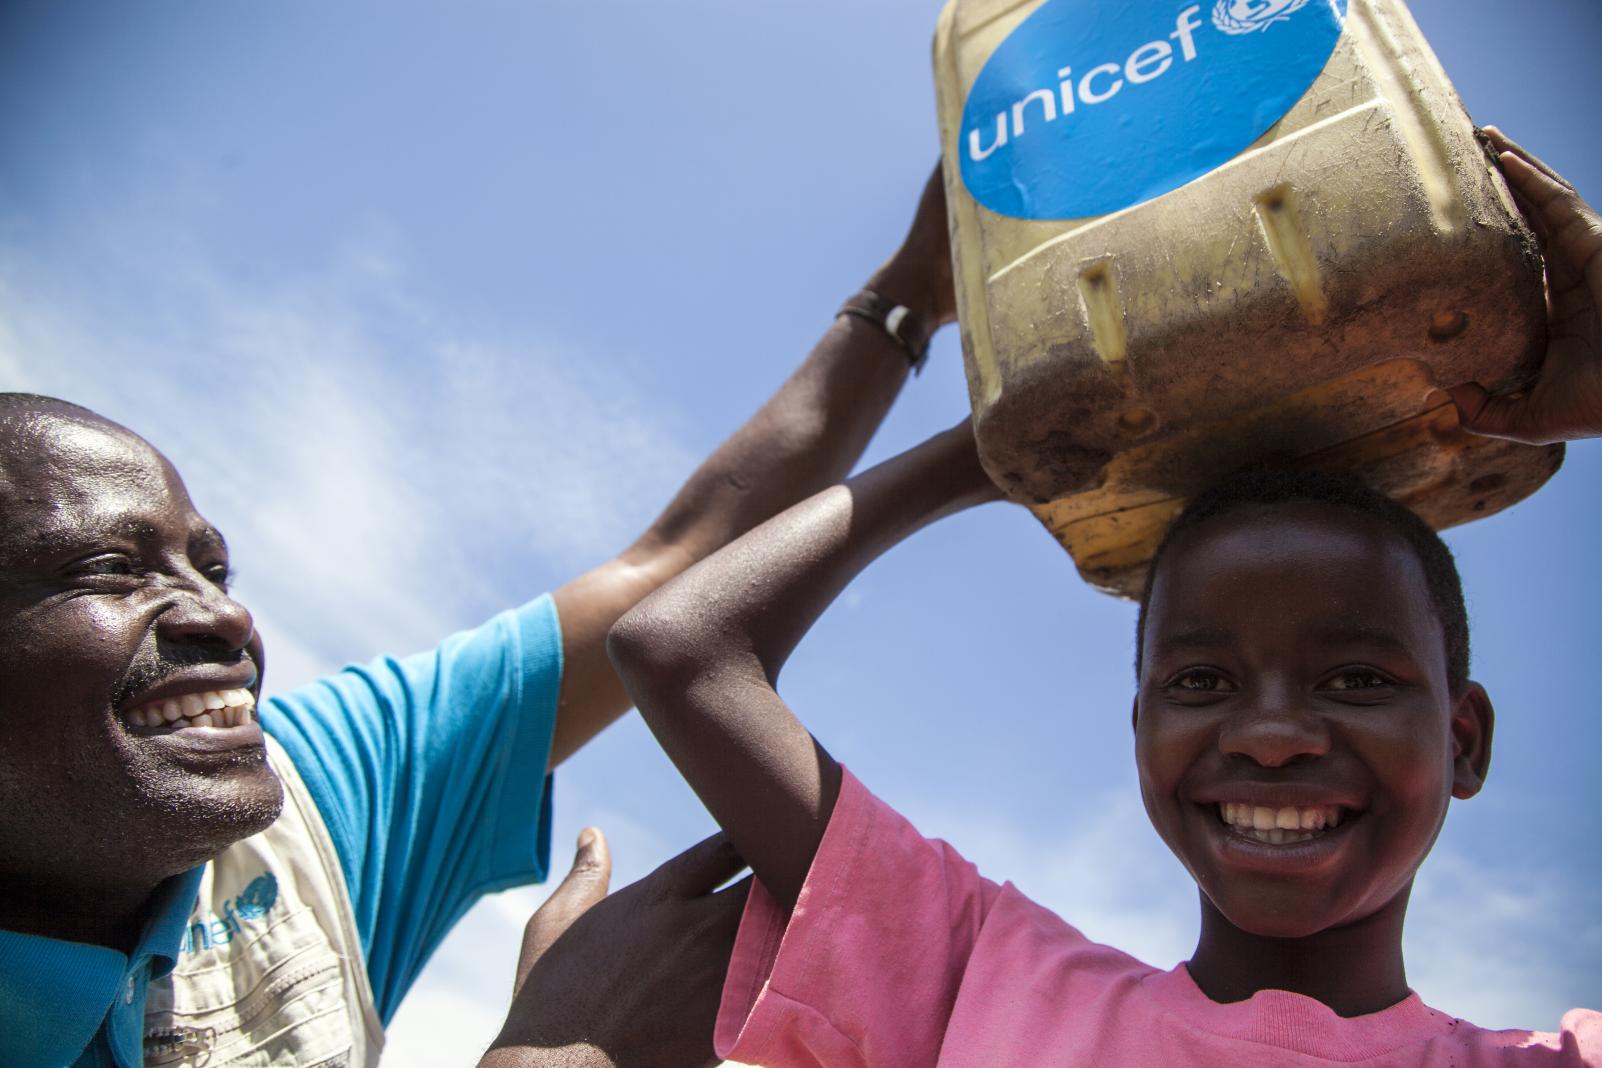 UNICEF WASH Officer helps place a bucket of clean water on a girlu2019s head Ituri DRC